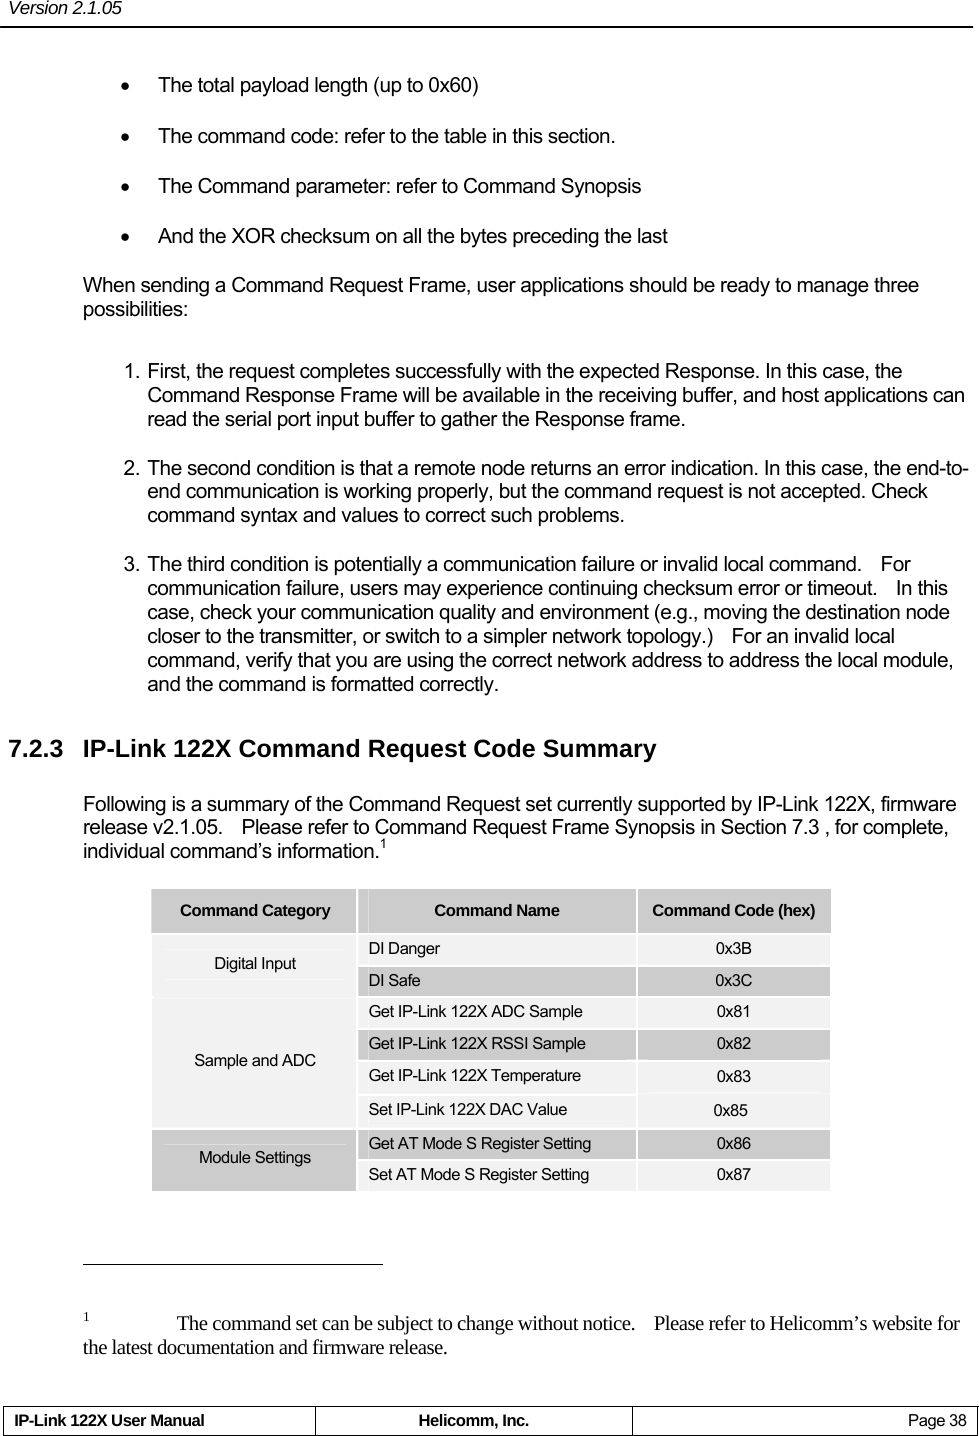 Version 2.1.05     IP-Link 122X User Manual  Helicomm, Inc.  Page 38 •  The total payload length (up to 0x60) •  The command code: refer to the table in this section. •  The Command parameter: refer to Command Synopsis •  And the XOR checksum on all the bytes preceding the last When sending a Command Request Frame, user applications should be ready to manage three possibilities: 1. First, the request completes successfully with the expected Response. In this case, the Command Response Frame will be available in the receiving buffer, and host applications can read the serial port input buffer to gather the Response frame. 2. The second condition is that a remote node returns an error indication. In this case, the end-to-end communication is working properly, but the command request is not accepted. Check command syntax and values to correct such problems. 3. The third condition is potentially a communication failure or invalid local command.    For communication failure, users may experience continuing checksum error or timeout.    In this case, check your communication quality and environment (e.g., moving the destination node closer to the transmitter, or switch to a simpler network topology.)    For an invalid local command, verify that you are using the correct network address to address the local module, and the command is formatted correctly. 7.2.3  IP-Link 122X Command Request Code Summary Following is a summary of the Command Request set currently supported by IP-Link 122X, firmware release v2.1.05.    Please refer to Command Request Frame Synopsis in Section 7.3 , for complete, individual command’s information.1 Command Category  Command Name  Command Code (hex) DI Danger  0x3B Digital Input DI Safe  0x3C Get IP-Link 122X ADC Sample  0x81 Get IP-Link 122X RSSI Sample  0x82 Get IP-Link 122X Temperature  0x83 Sample and ADC Set IP-Link 122X DAC Value           0x85 Get AT Mode S Register Setting  0x86 Module Settings Set AT Mode S Register Setting  0x87                                                       1      The command set can be subject to change without notice.    Please refer to Helicomm’s website for the latest documentation and firmware release. 